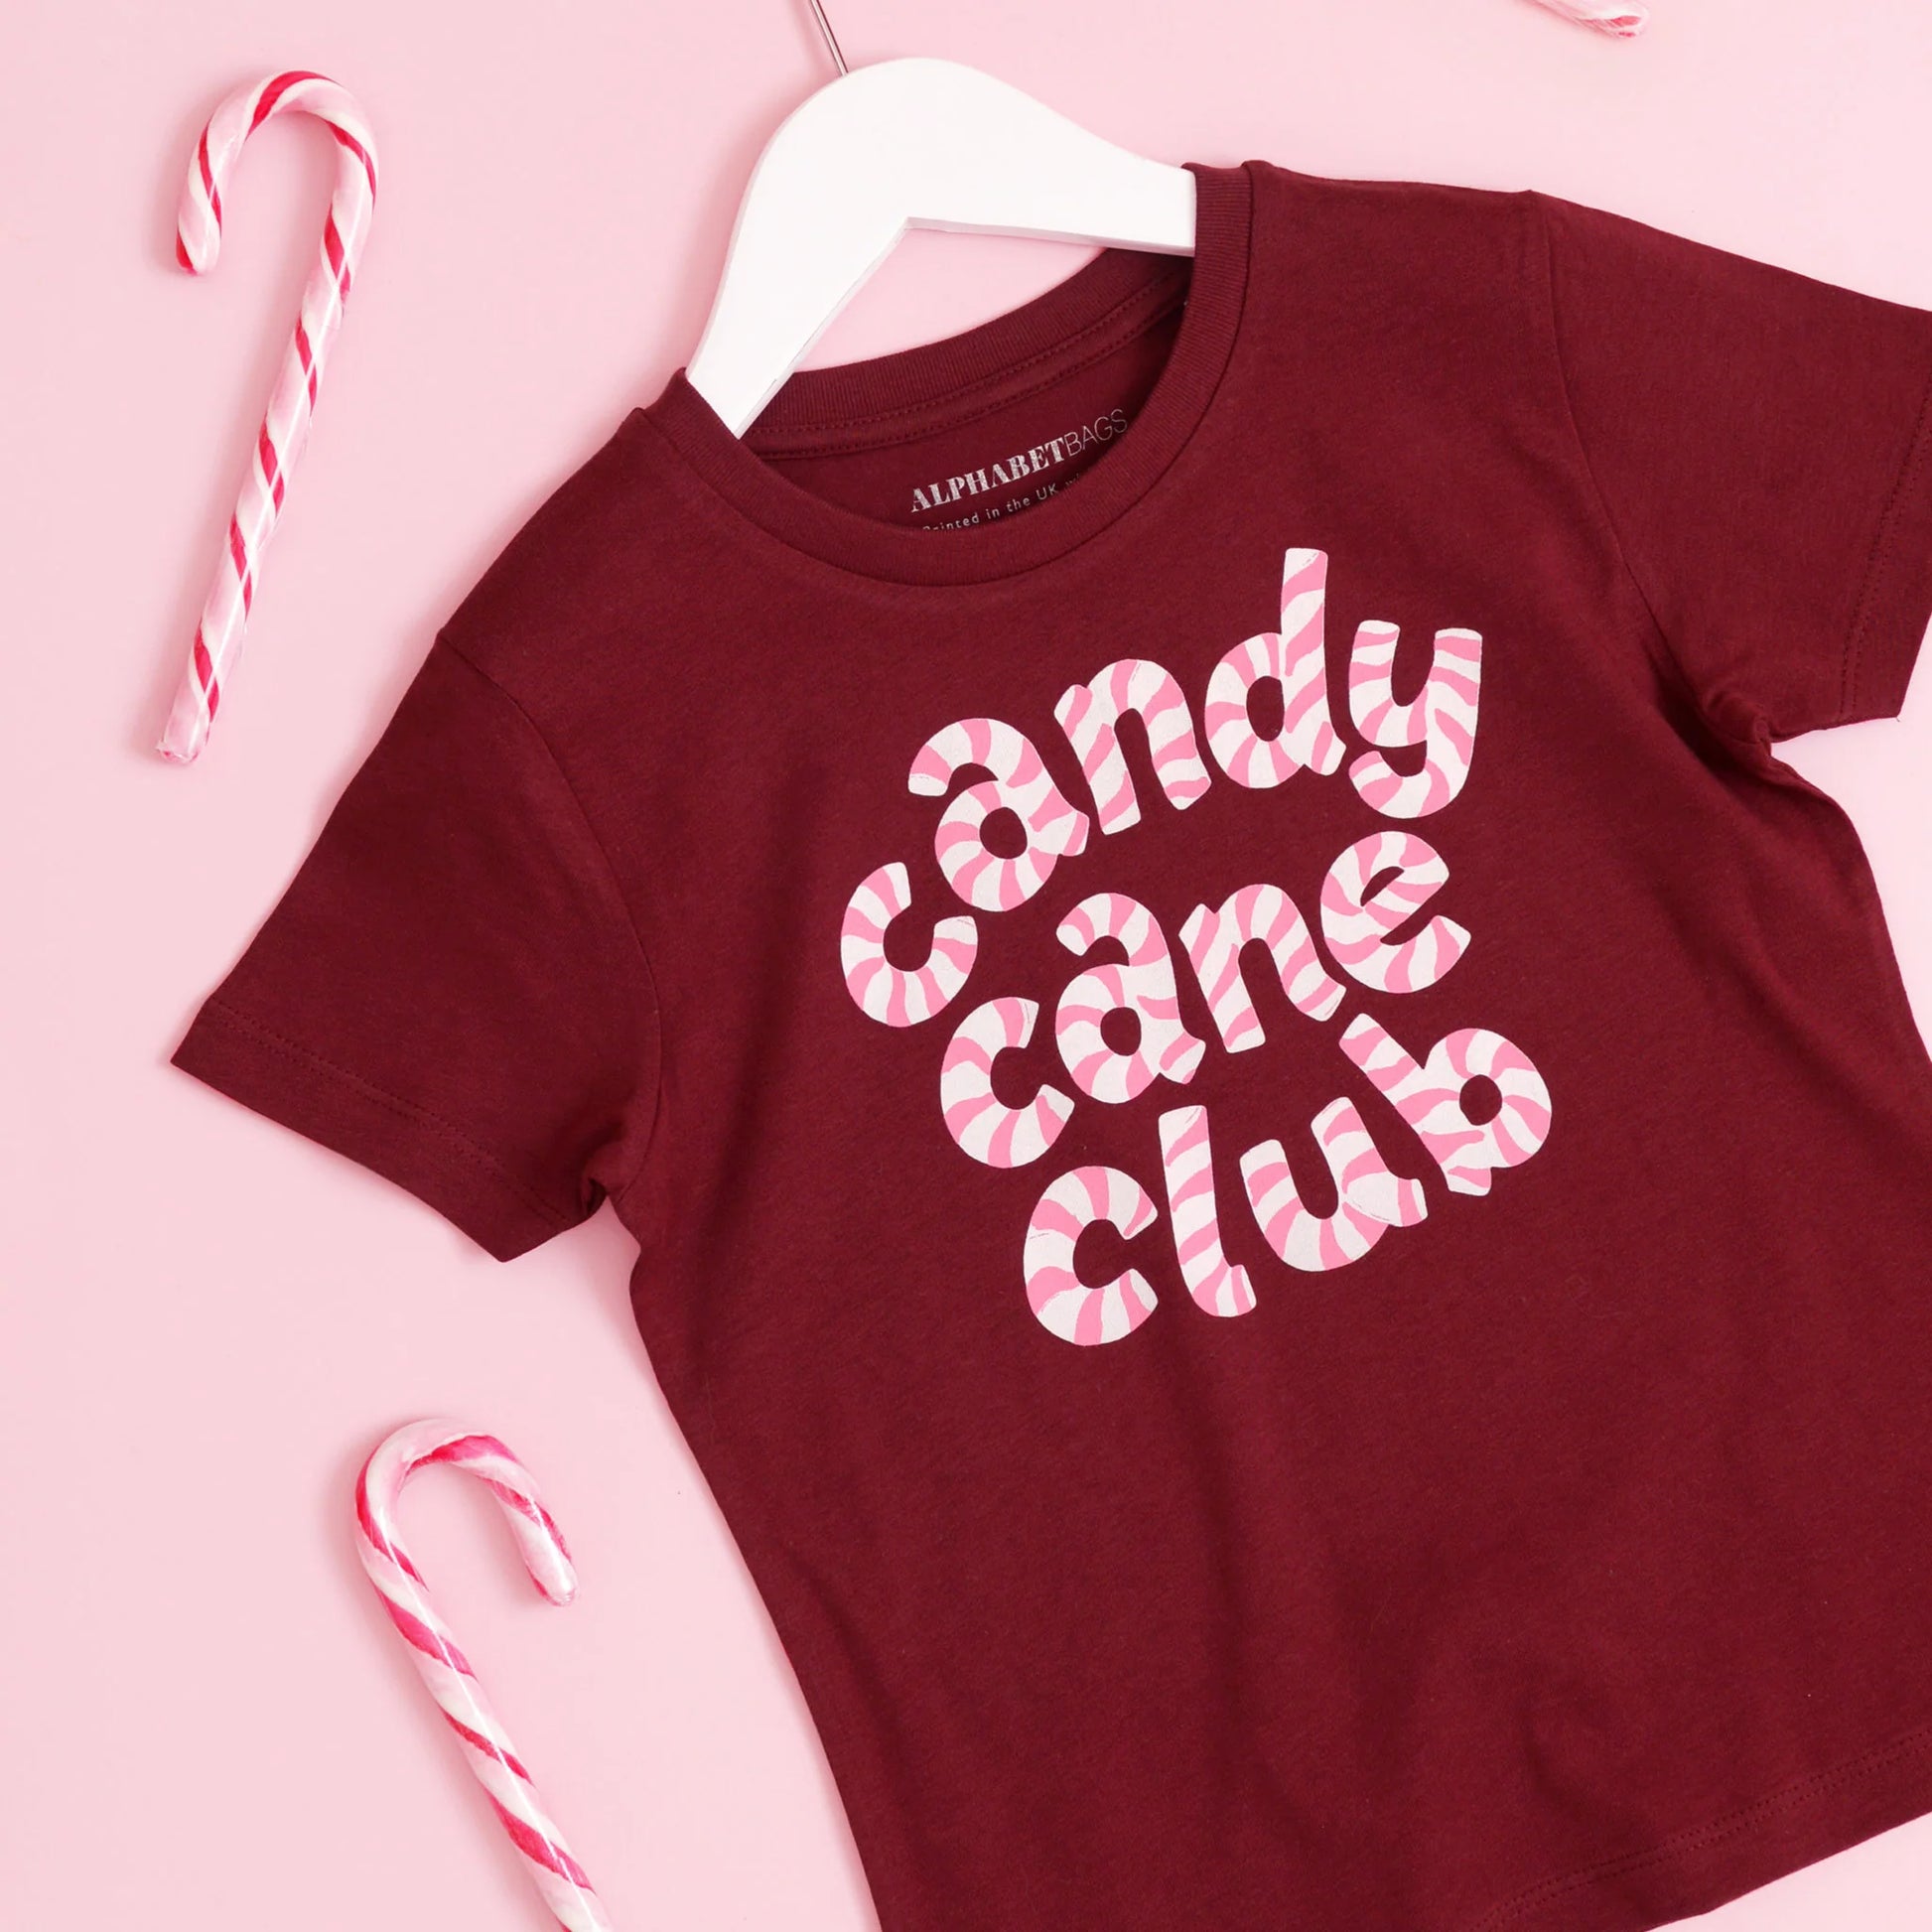 candy cane club t shirt by alphabet bags at whippersnappers online